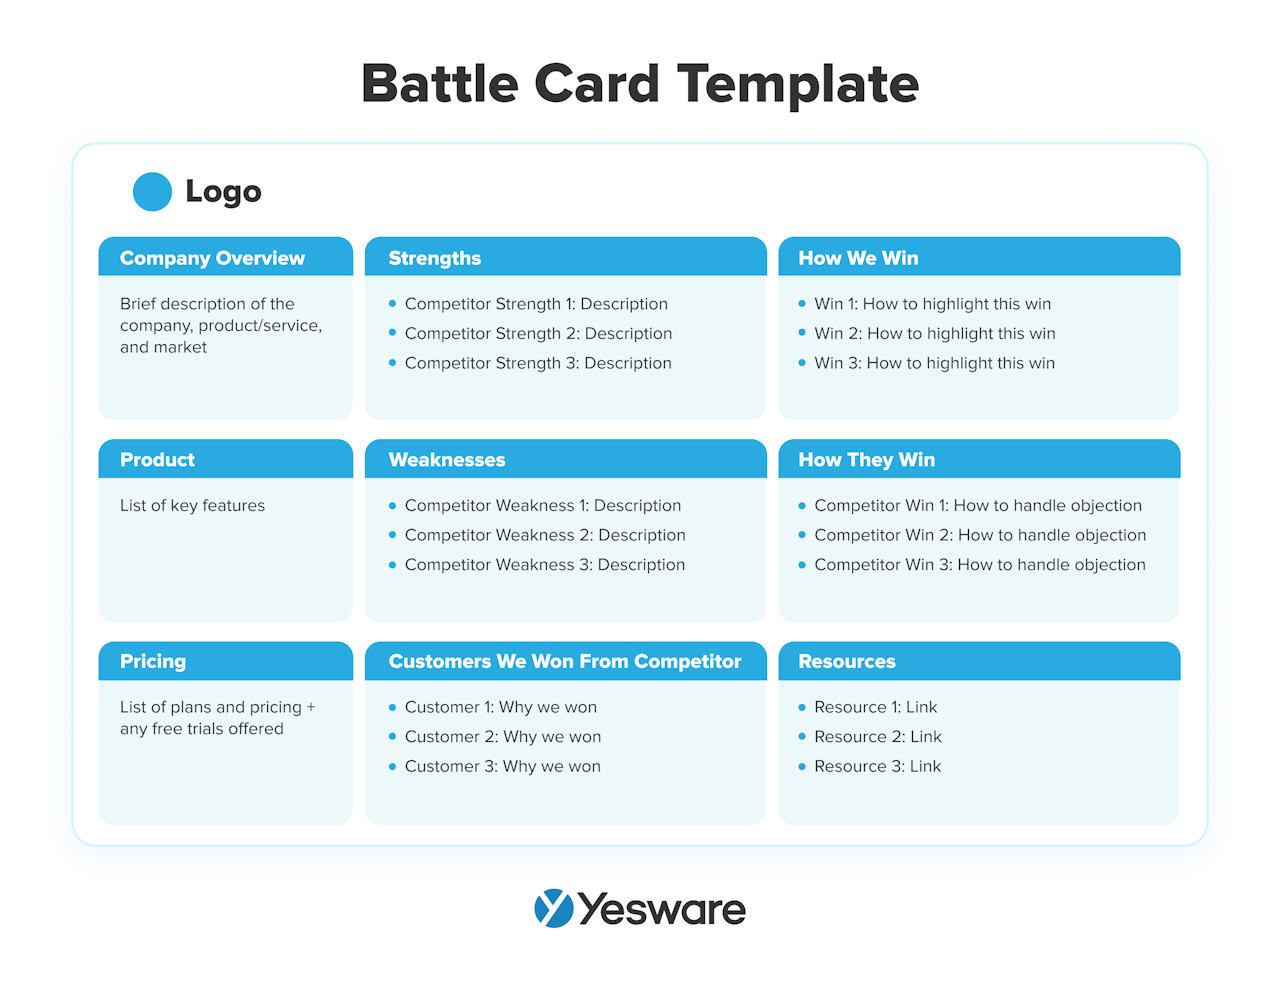 Target Account Selling: Battle Card Template